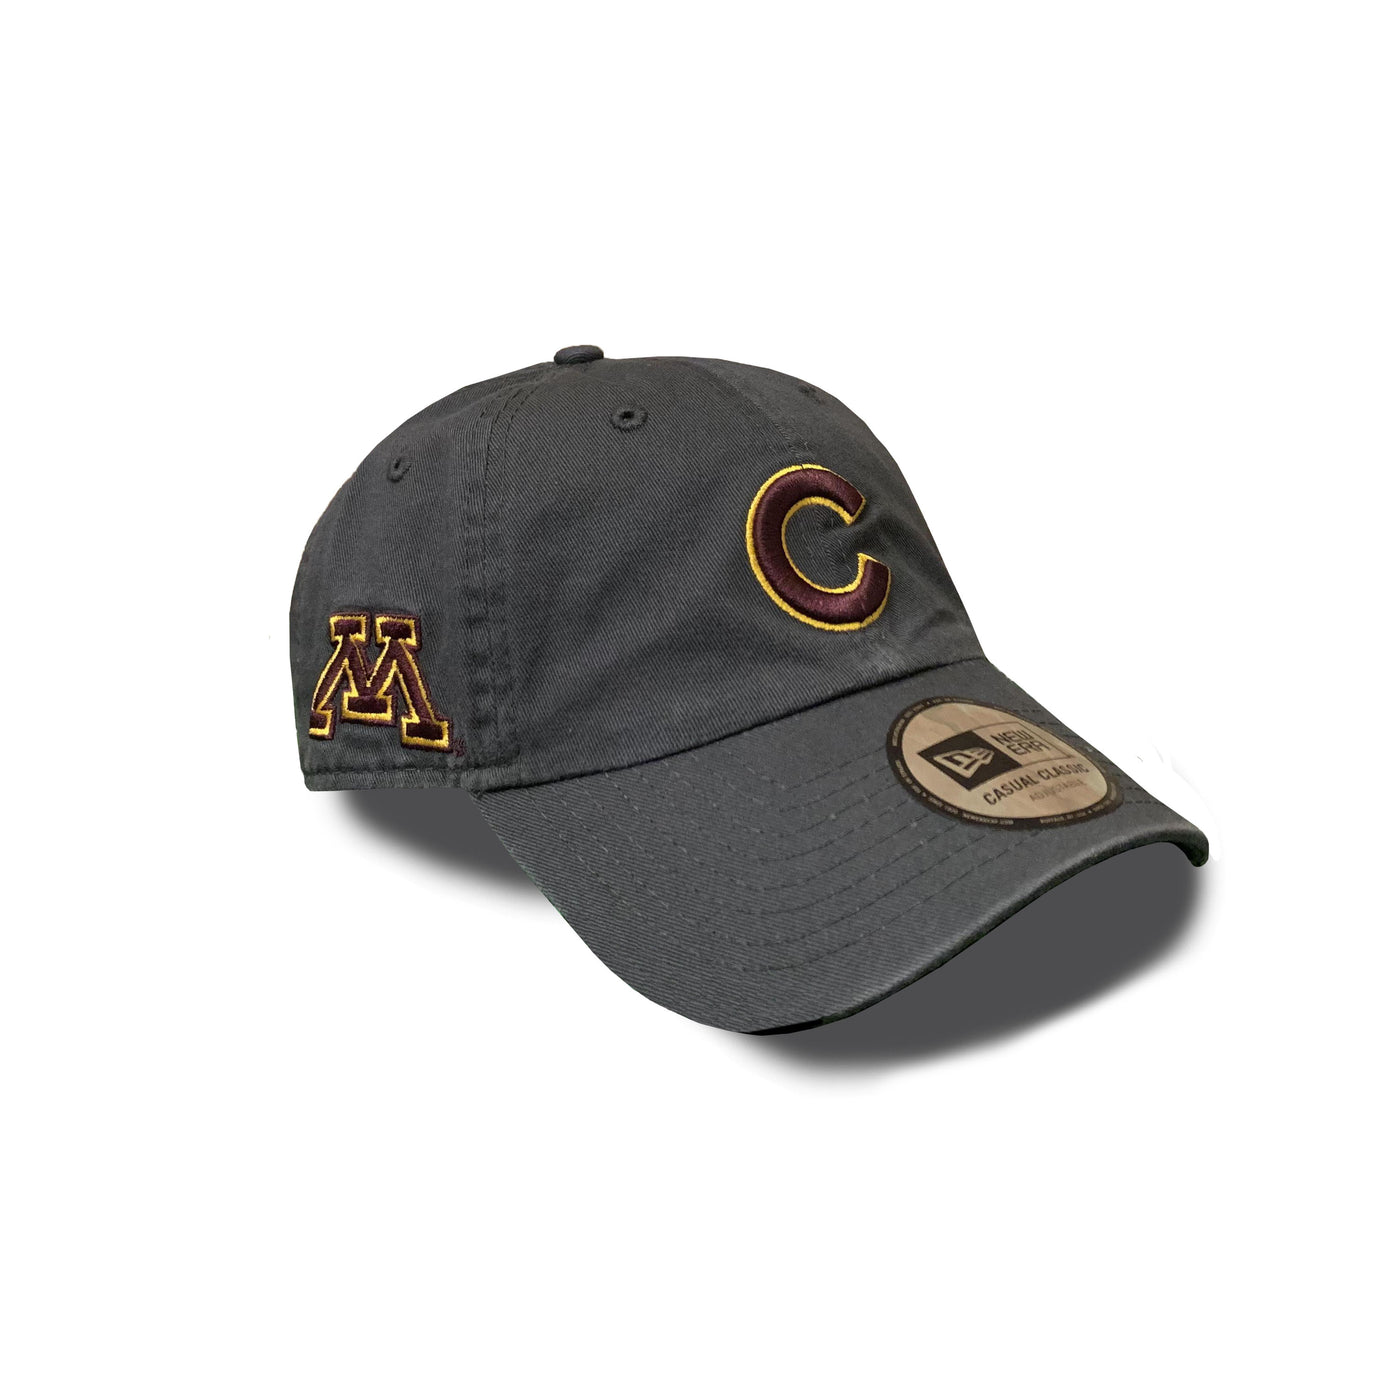 CHICAGO CUBS AND UNIVERSITY OF MINNESOTA ADJUSTABLE CAP - Ivy Shop